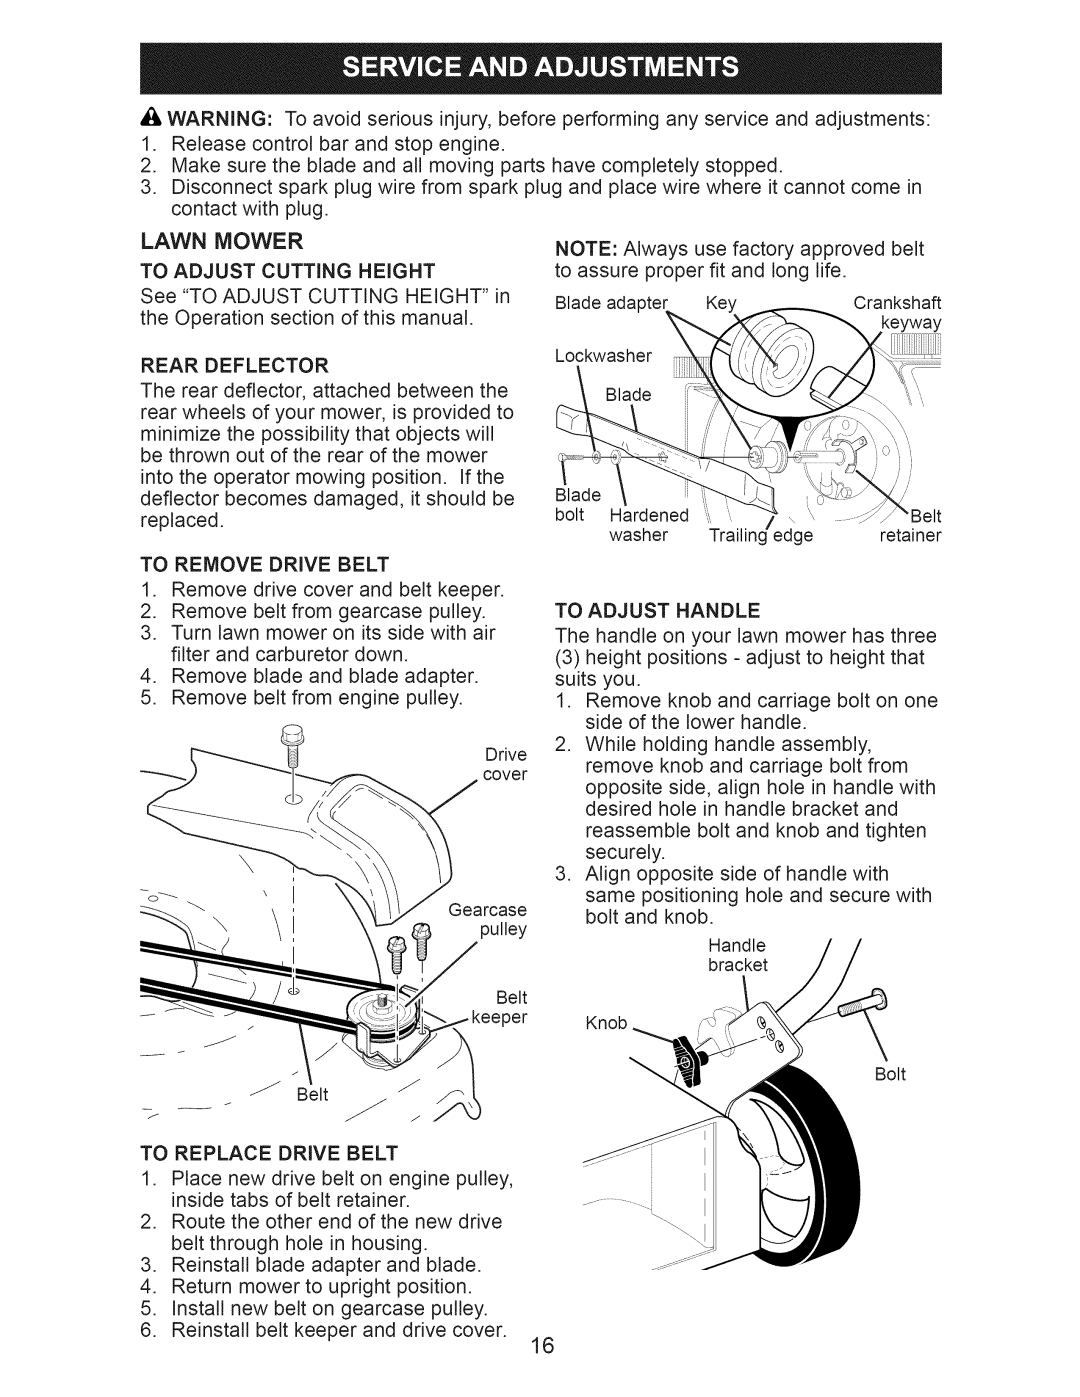 Craftsman 917.376405 owner manual Lawn Mower, Rear Deflector, To Remove Drive Belt, To Adjust Handle, To Replace Drive Belt 